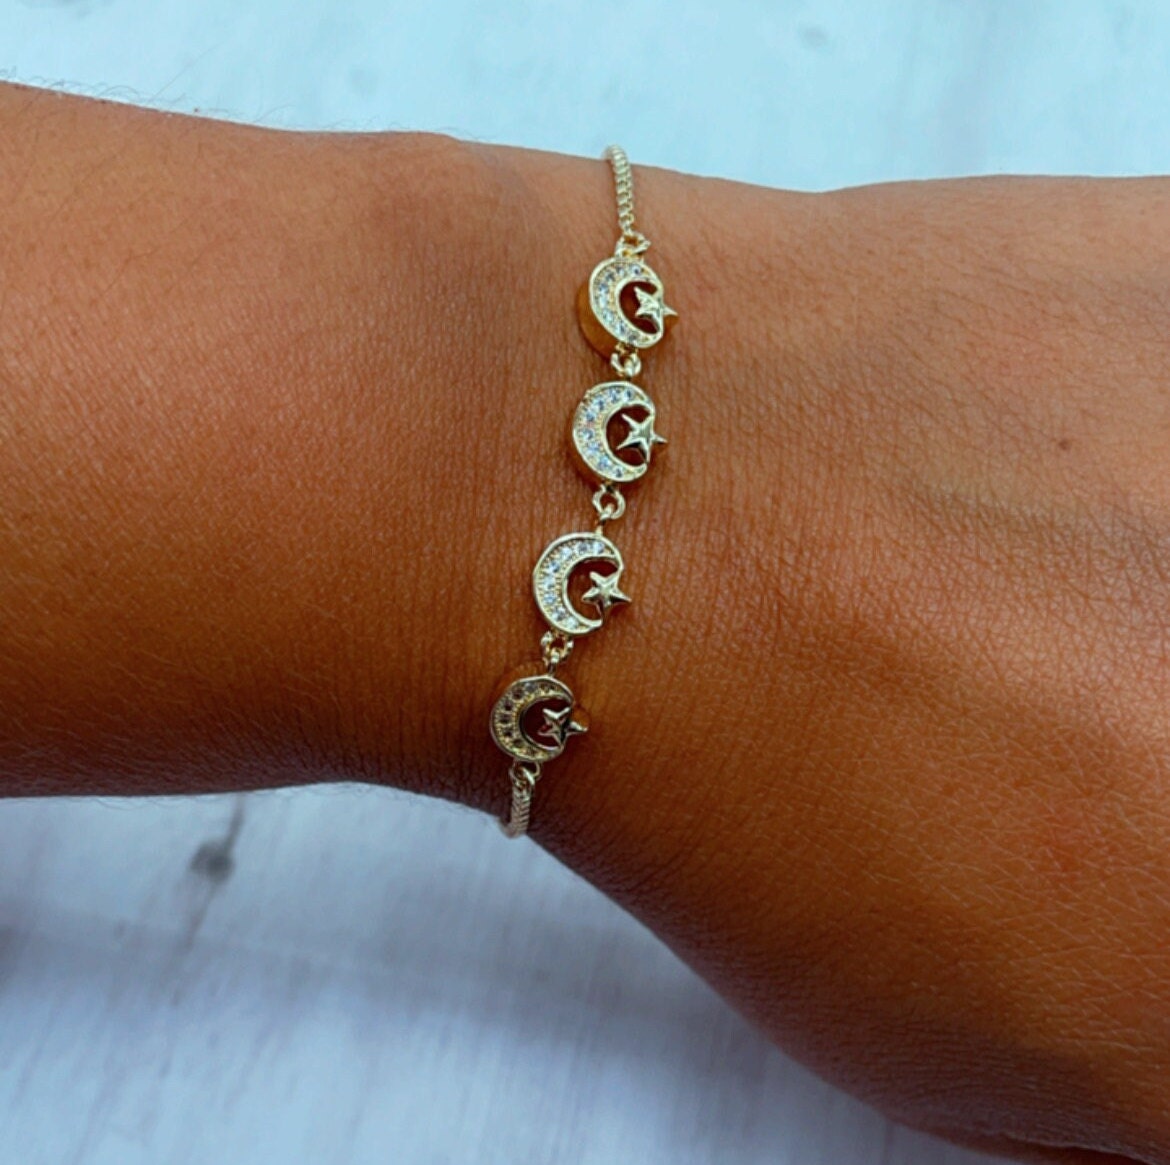 18k Gold Layered Moon and Star Adjustable Bracelet Featuring Cubic Zirconia,